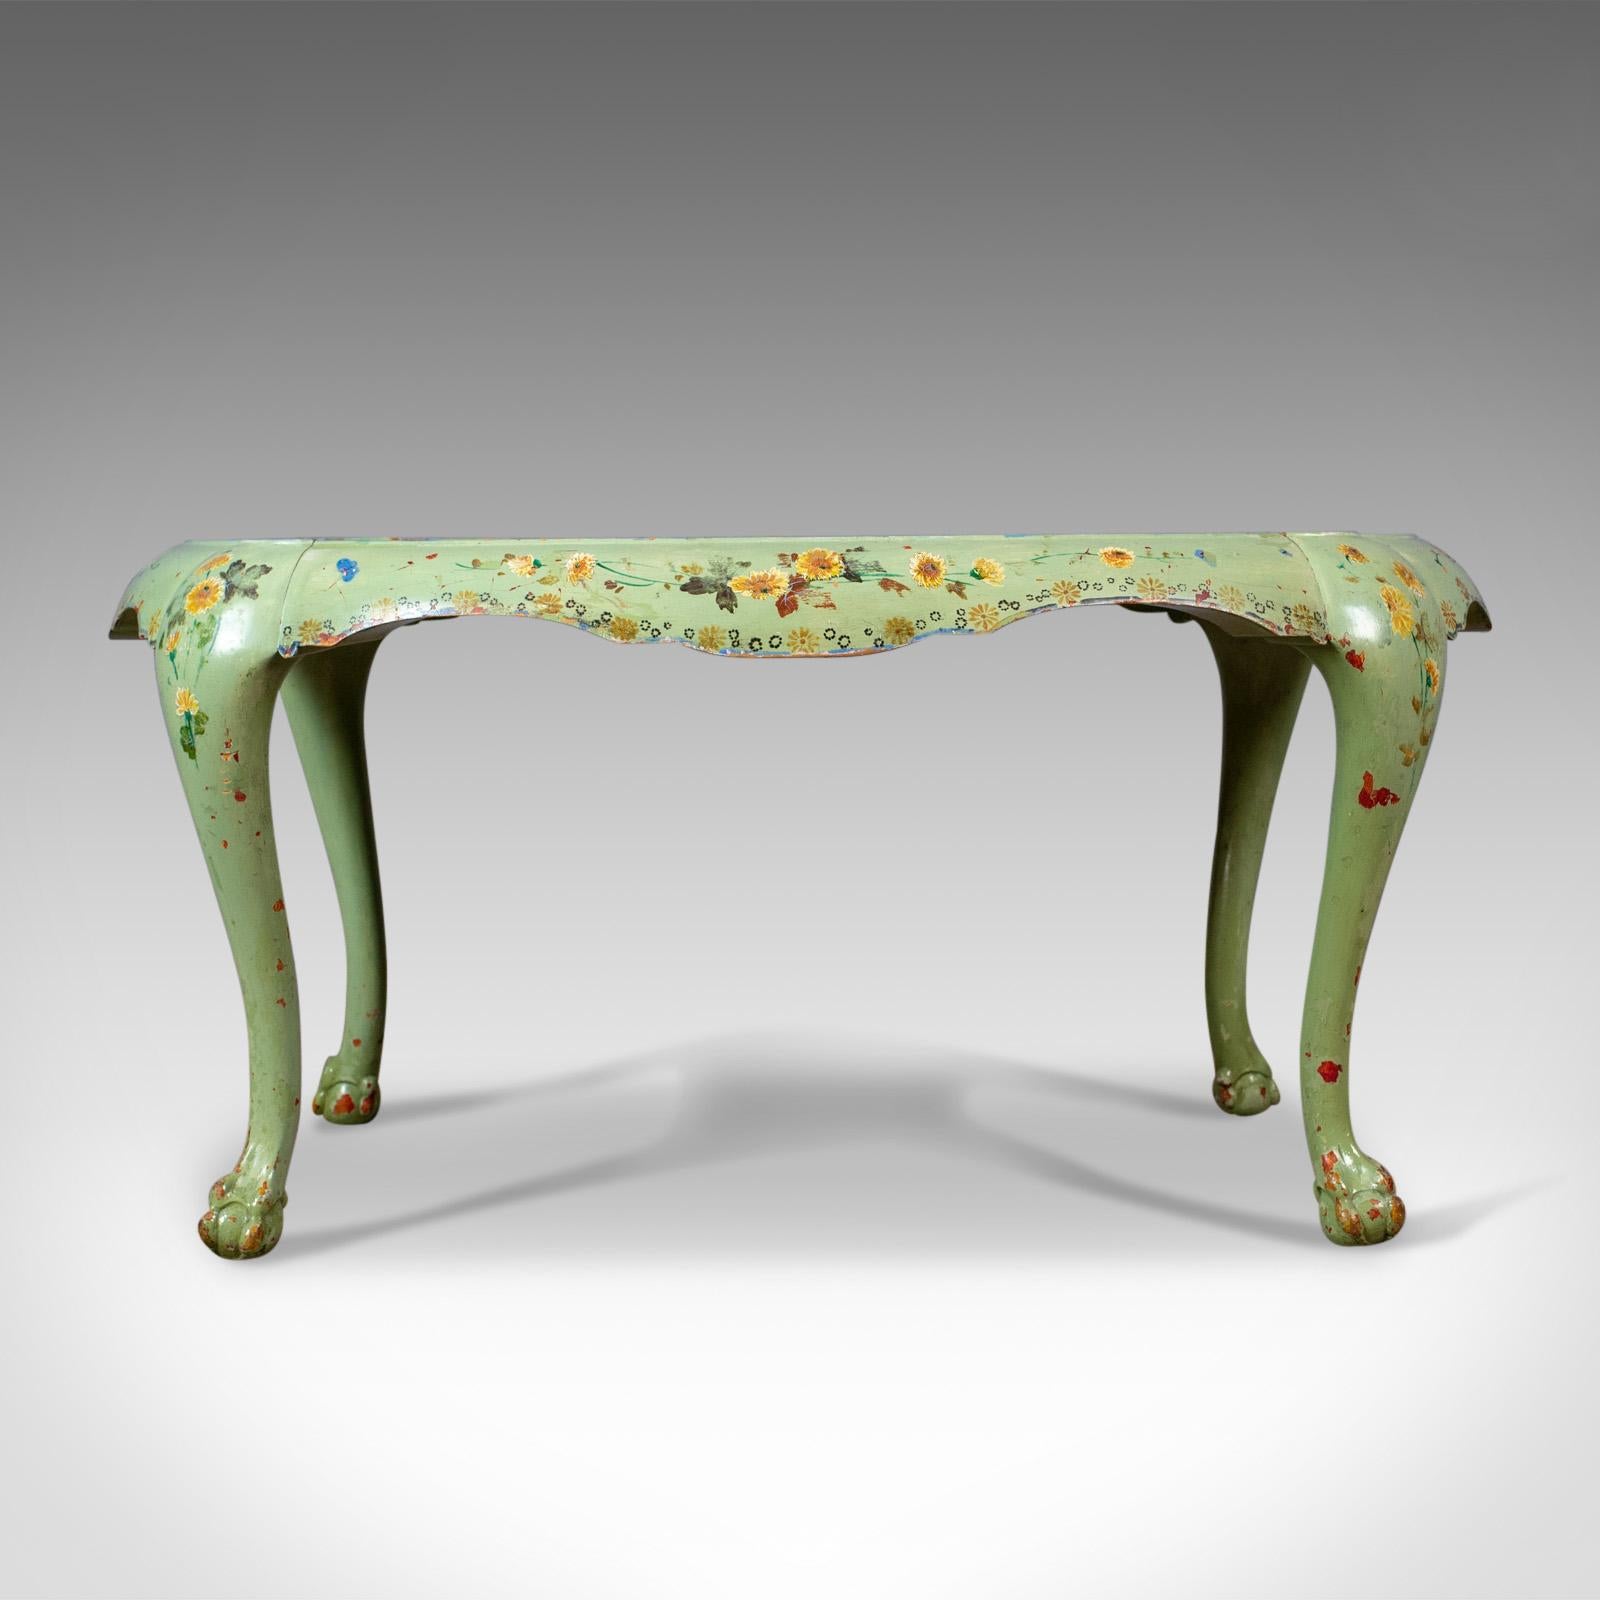 French Provincial Antique Side Table, French, Country, Hand-Painted, Coffee, Early 20th Century